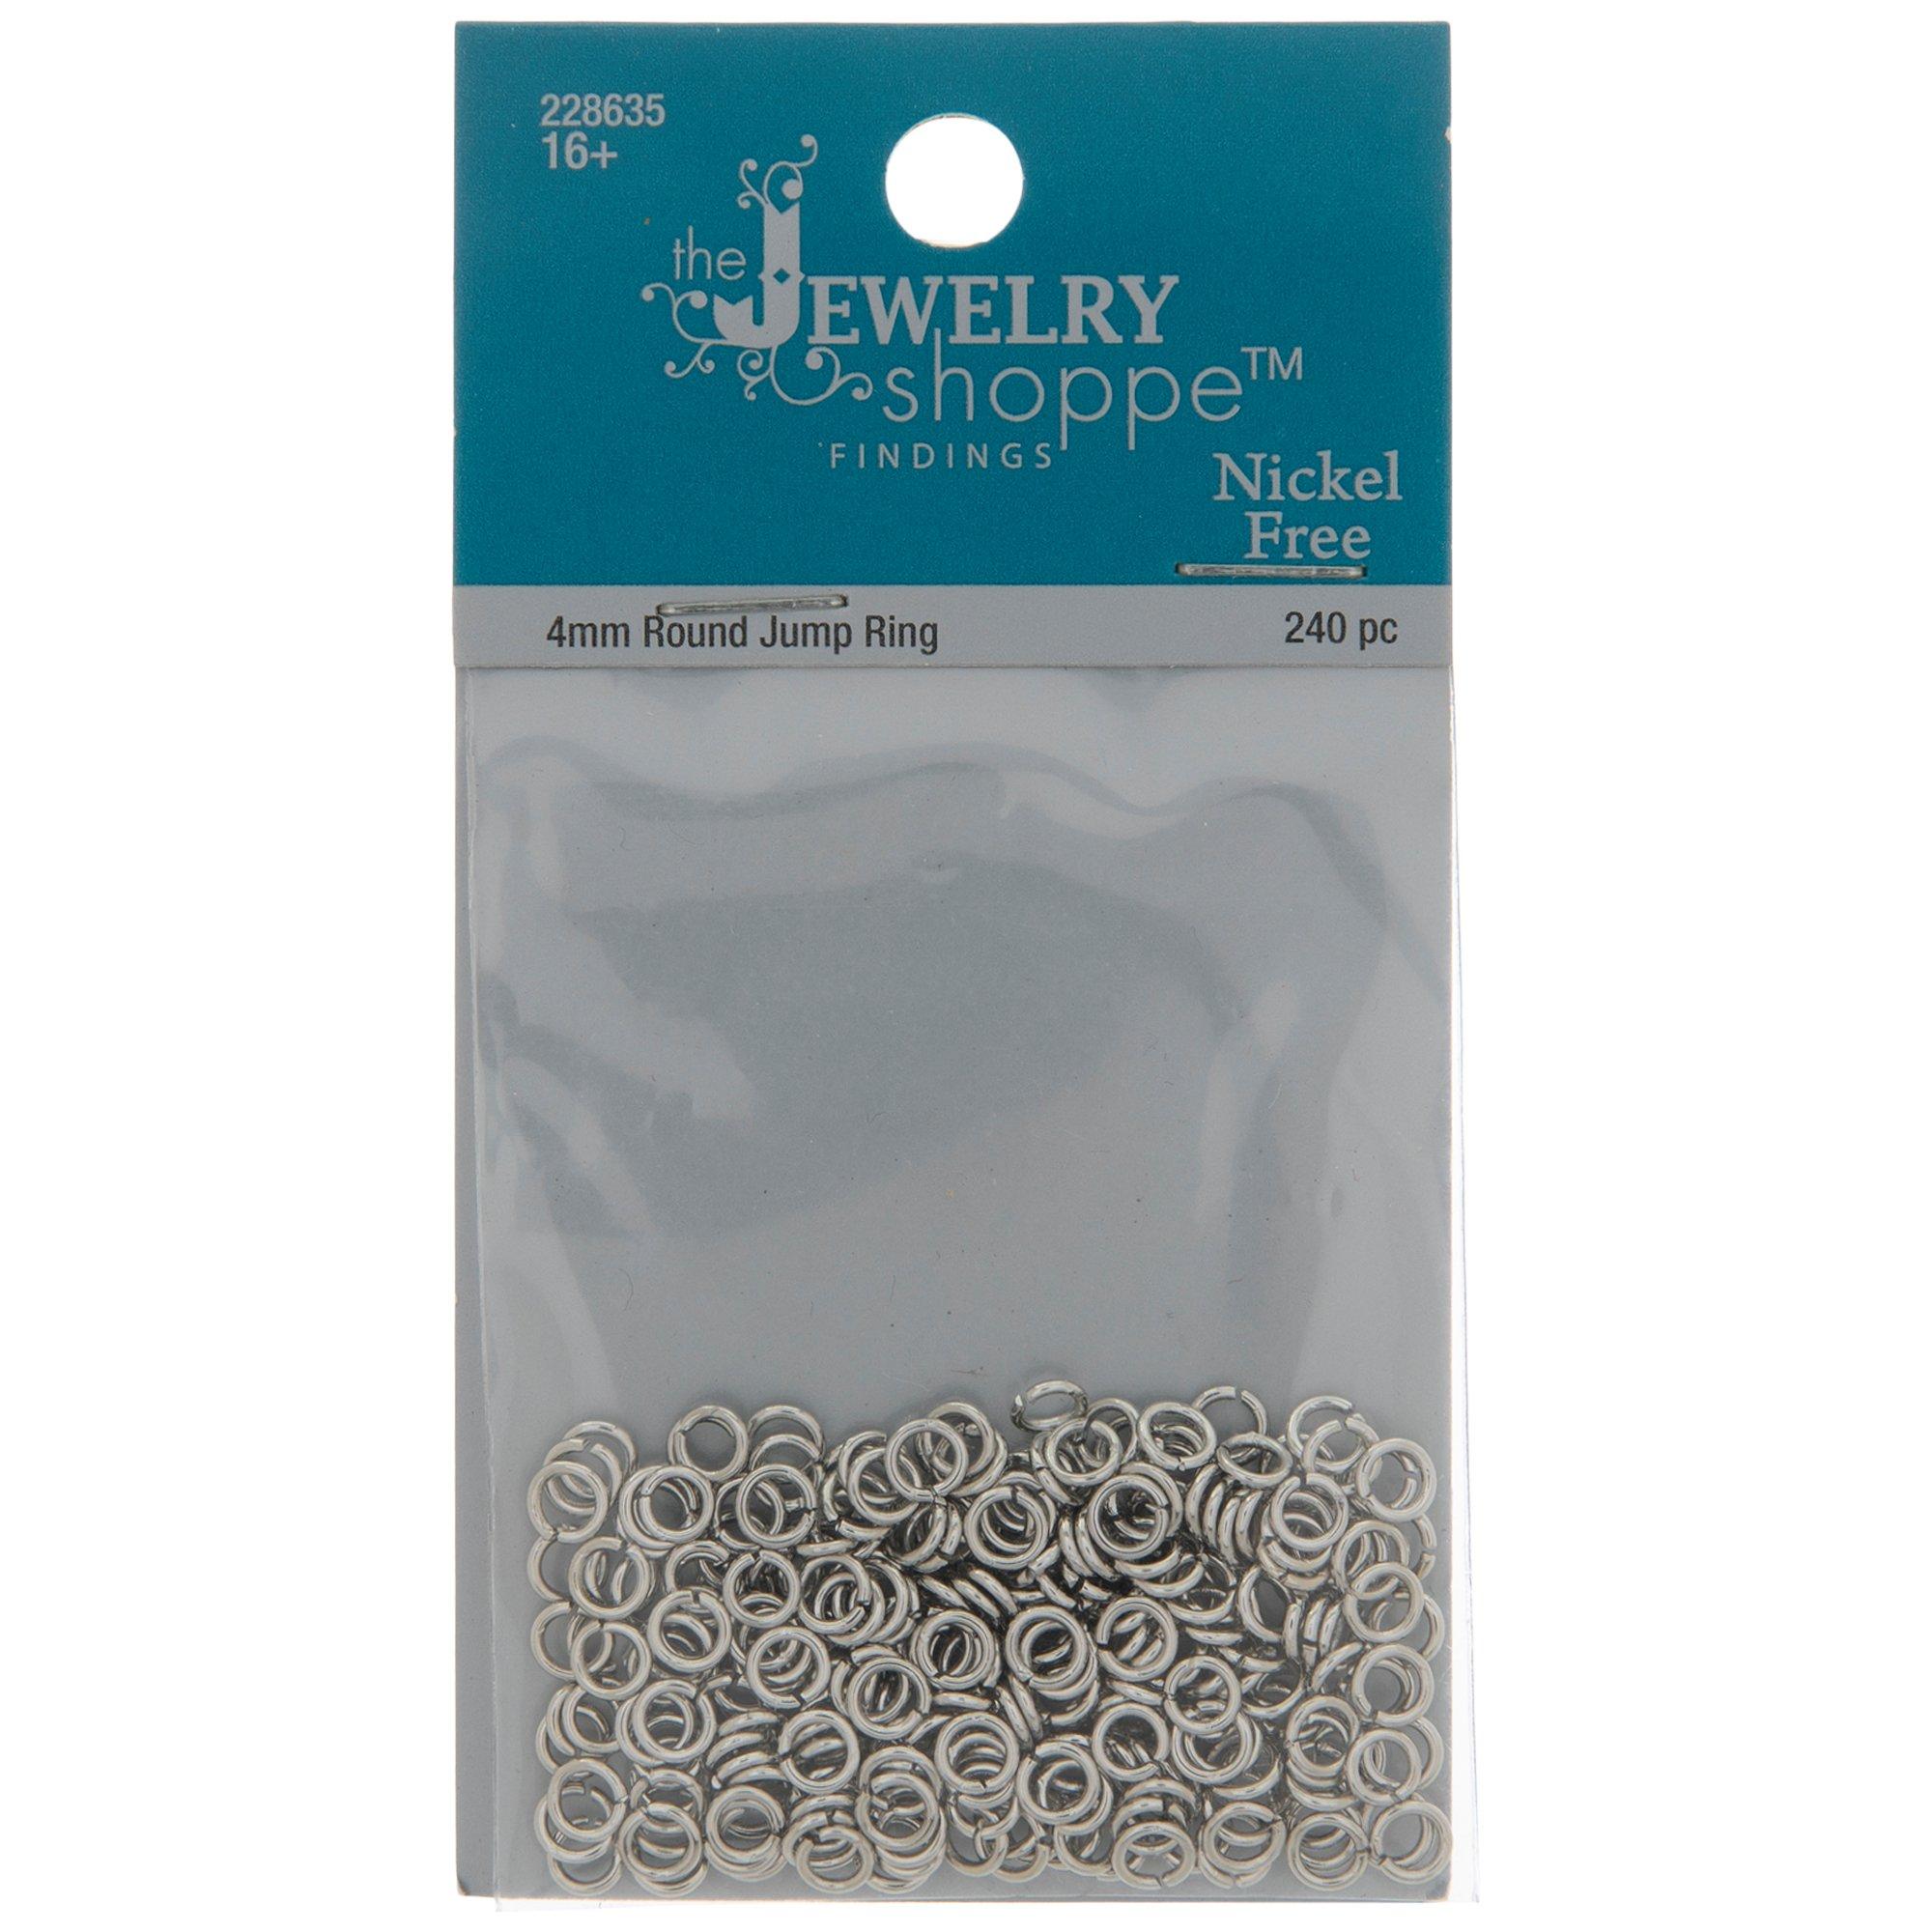  1800pcs Open Jump Rings, 4mm 5mm 6mm Assorted Size Jewelry Jump  Rings Connectors Open Jump Rings for Jewelry Making (Gold, Silver)